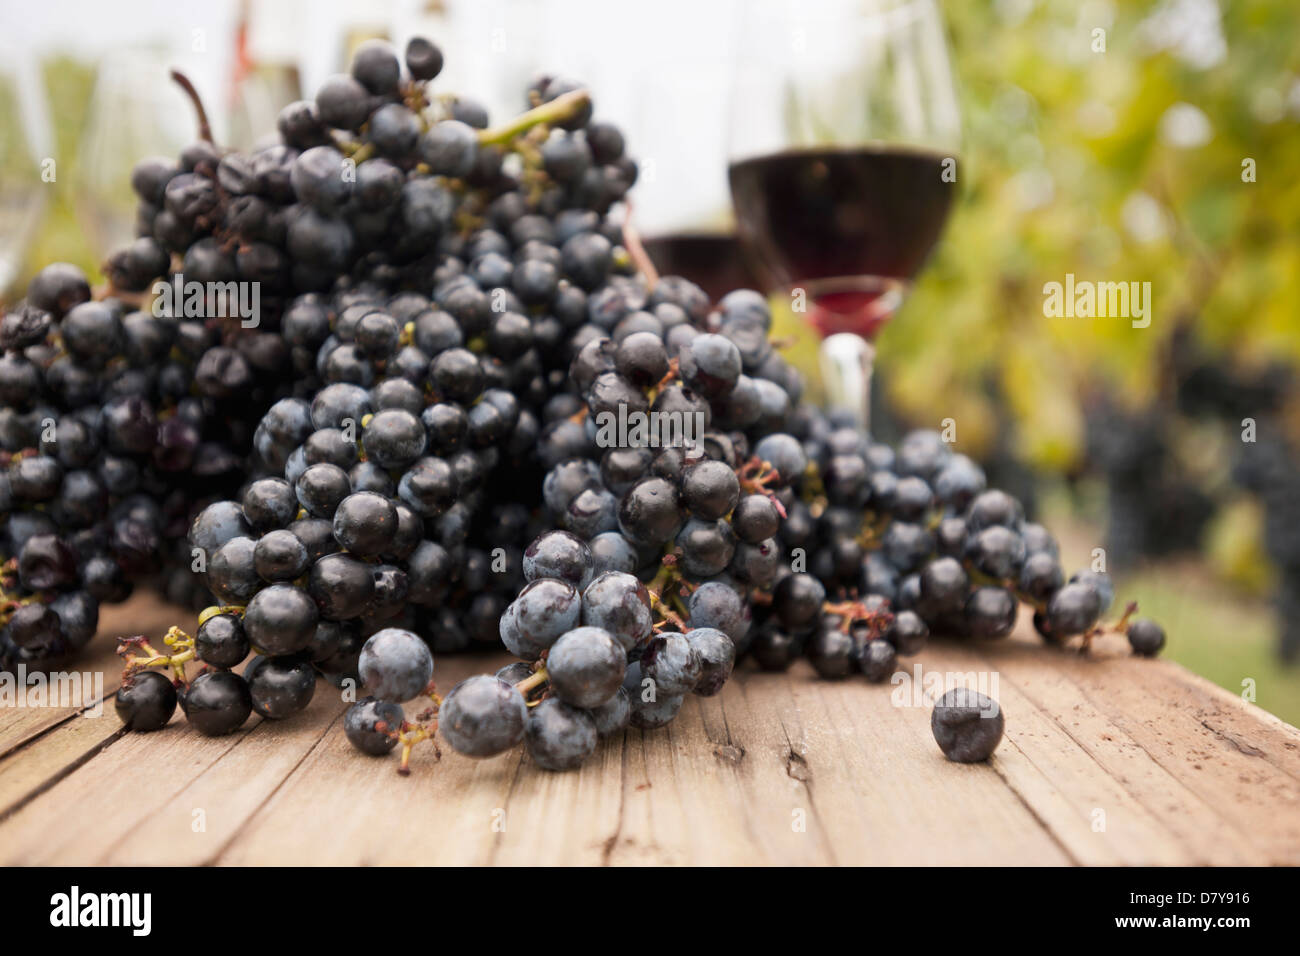 Grapes and glasses of wine on table outdoors Stock Photo